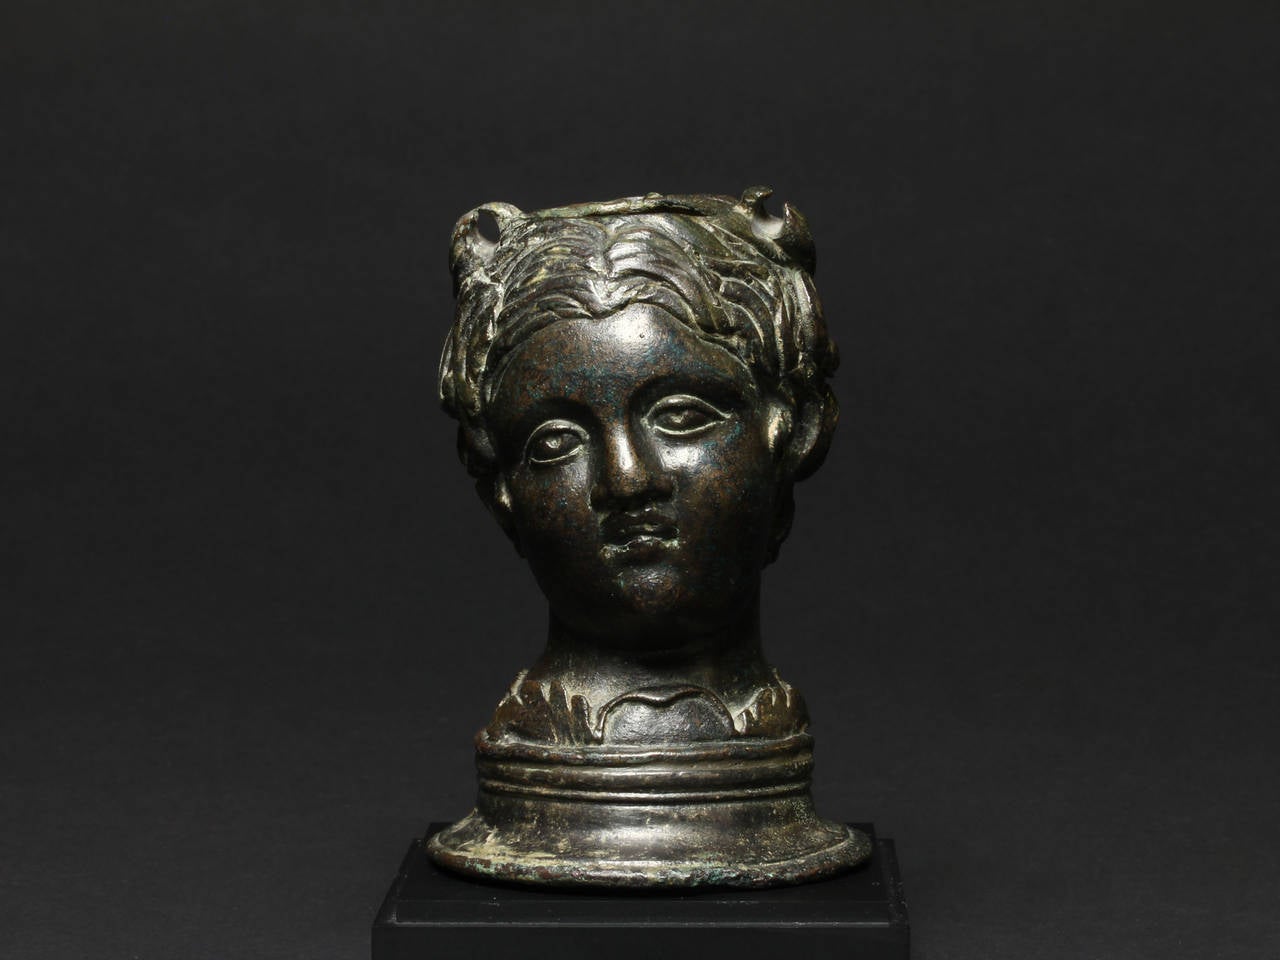 Depicted emerging from a wreath of vine leaves, the naturalistically rendered and finely modeled bust of a young boy with its head slightly titled right, composed of thick comma-shaped locks and frontal centrally parted hair, his large almond-shaped